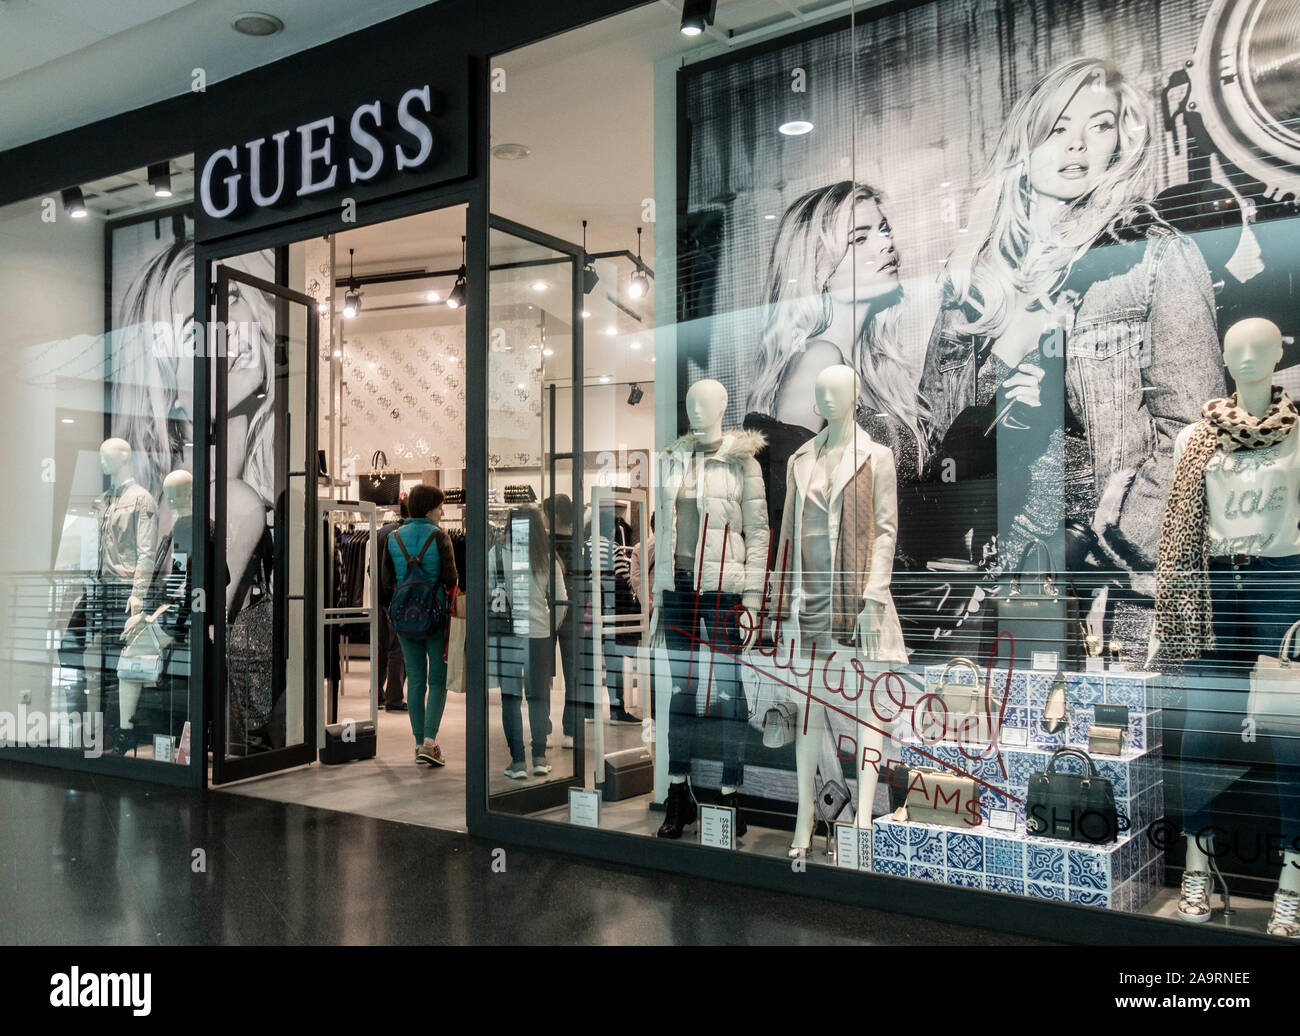 Skorpe Hjælp dyd Guess clothing store in Spain Stock Photo - Alamy